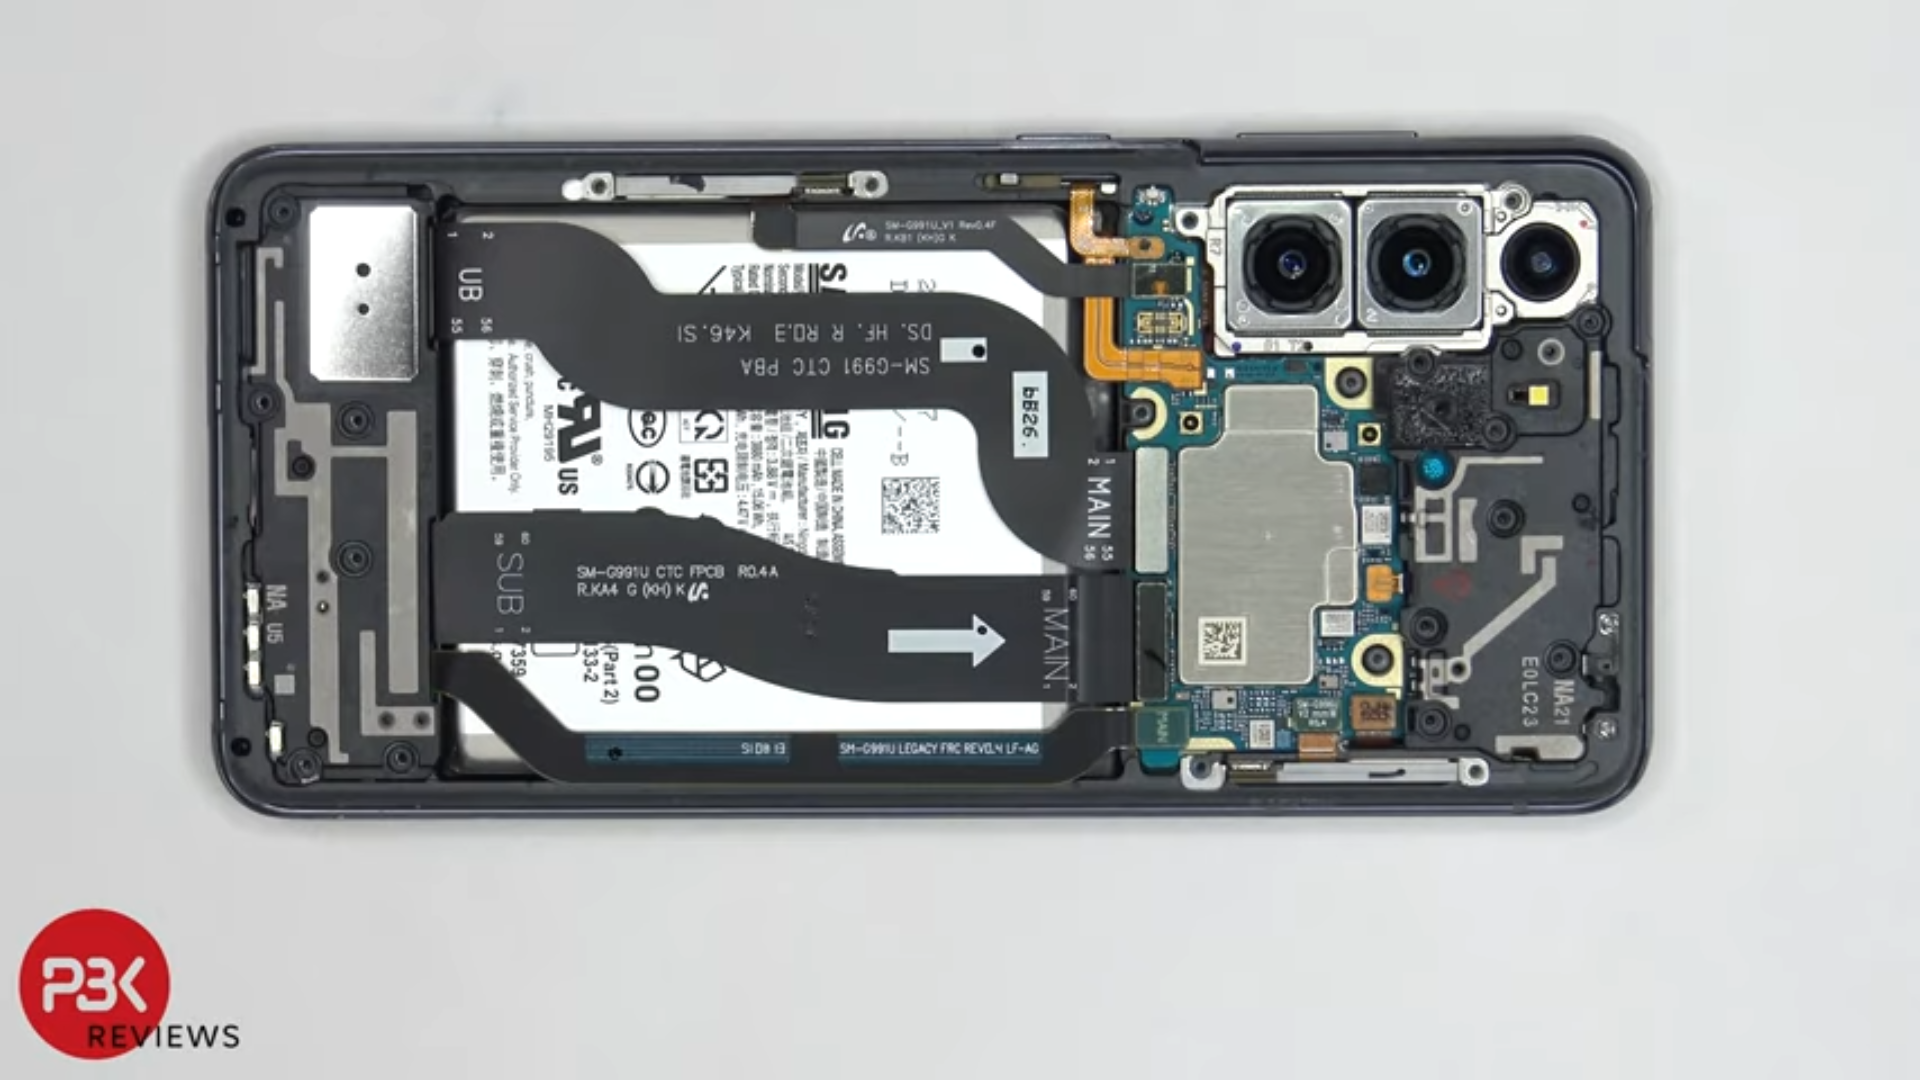 An initial disassembly of the Samsung Galaxy S21 suggests the future of repairability for its new flagship series